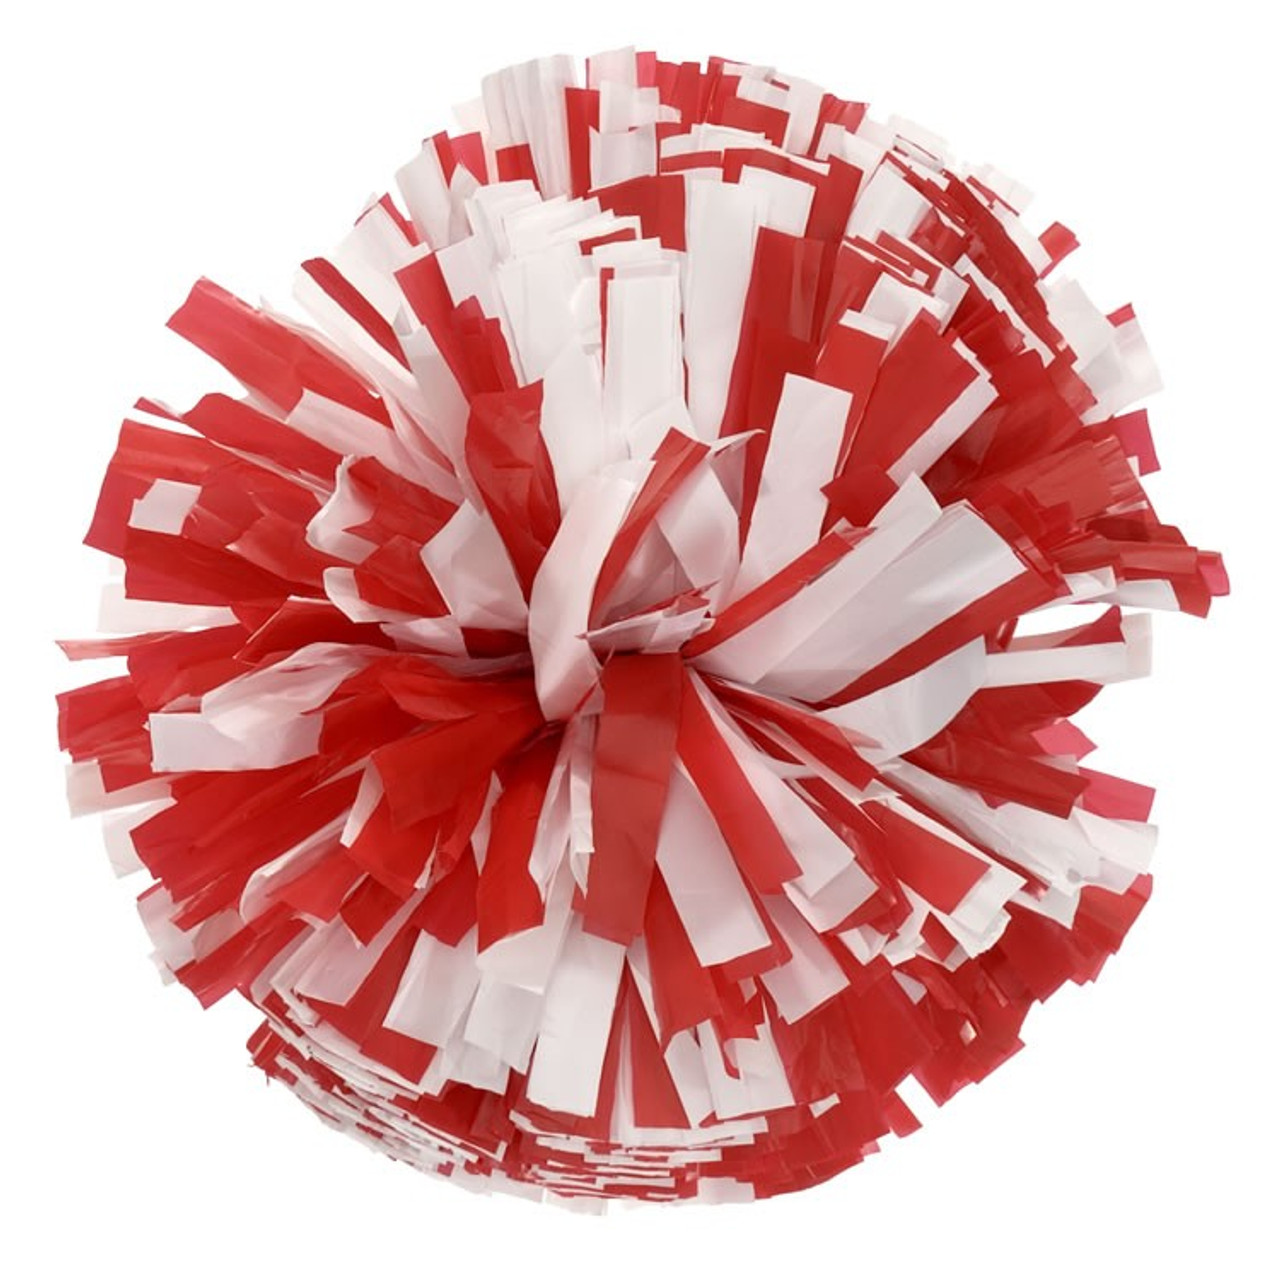 Cheerleading Pom Poms, Cheer Poms, Two Color Wet Look with Glitter